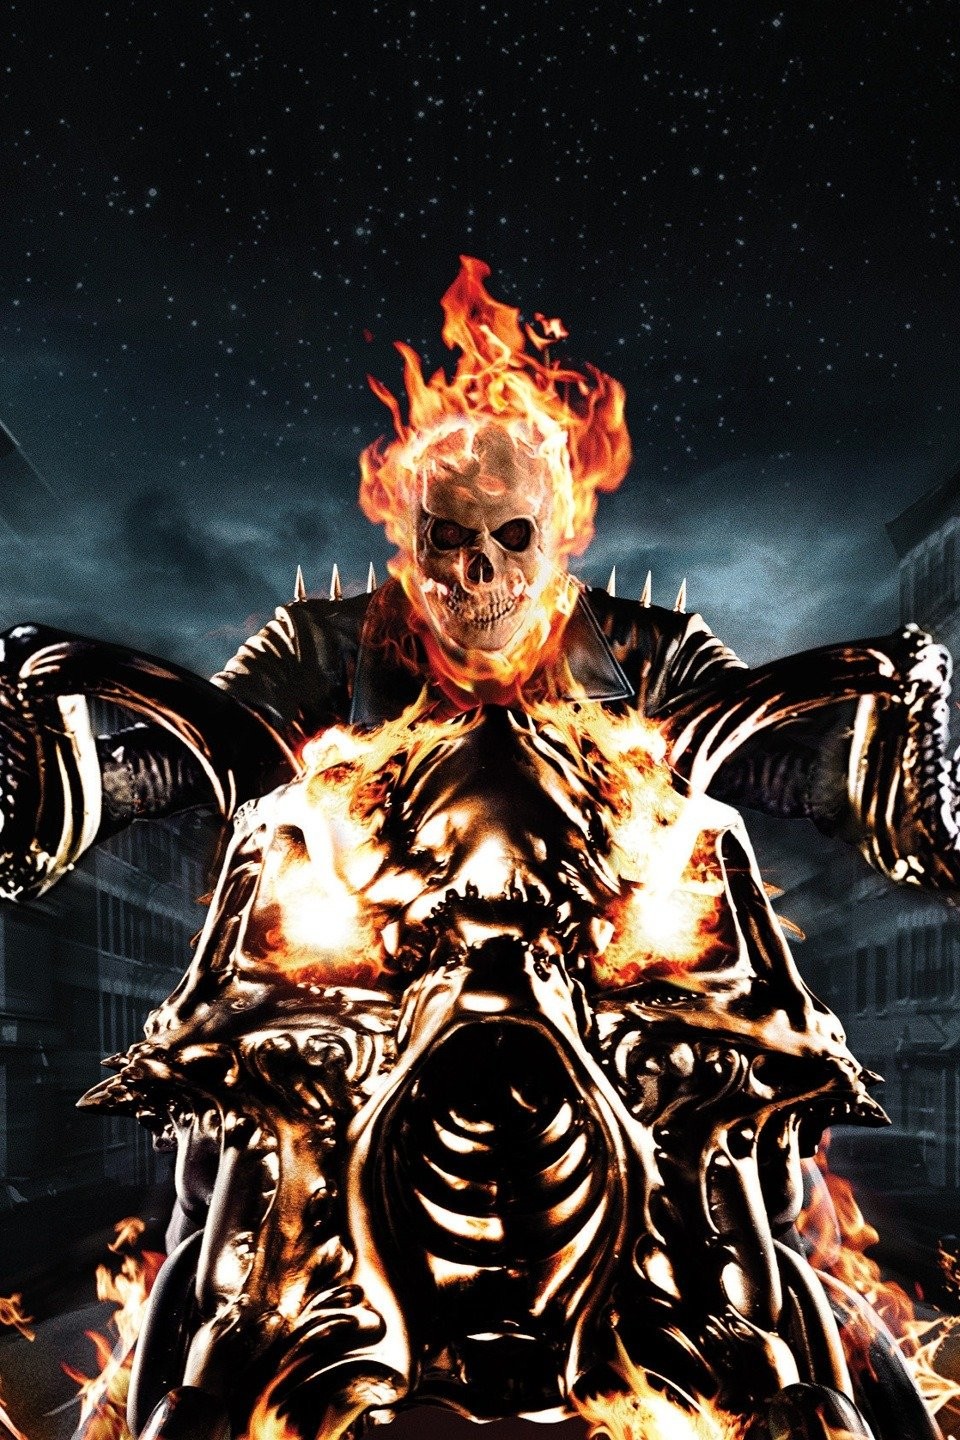 GHOST RIDER  Sony Pictures Entertainment